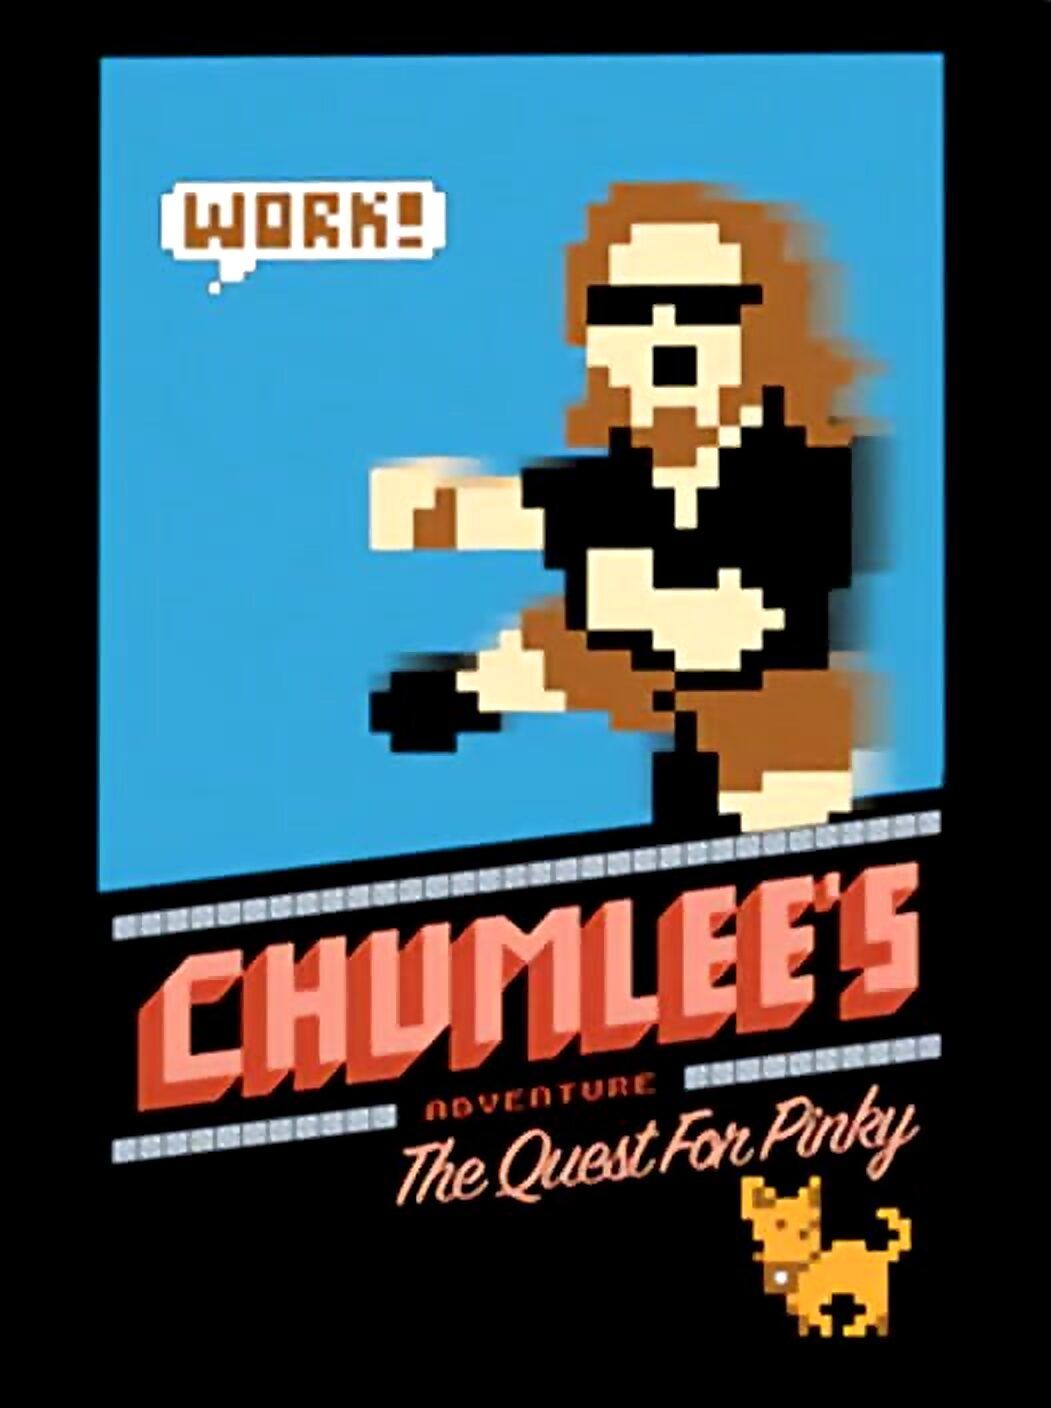 Chumlee’s Adventure: The Quest for Pinky Video Game